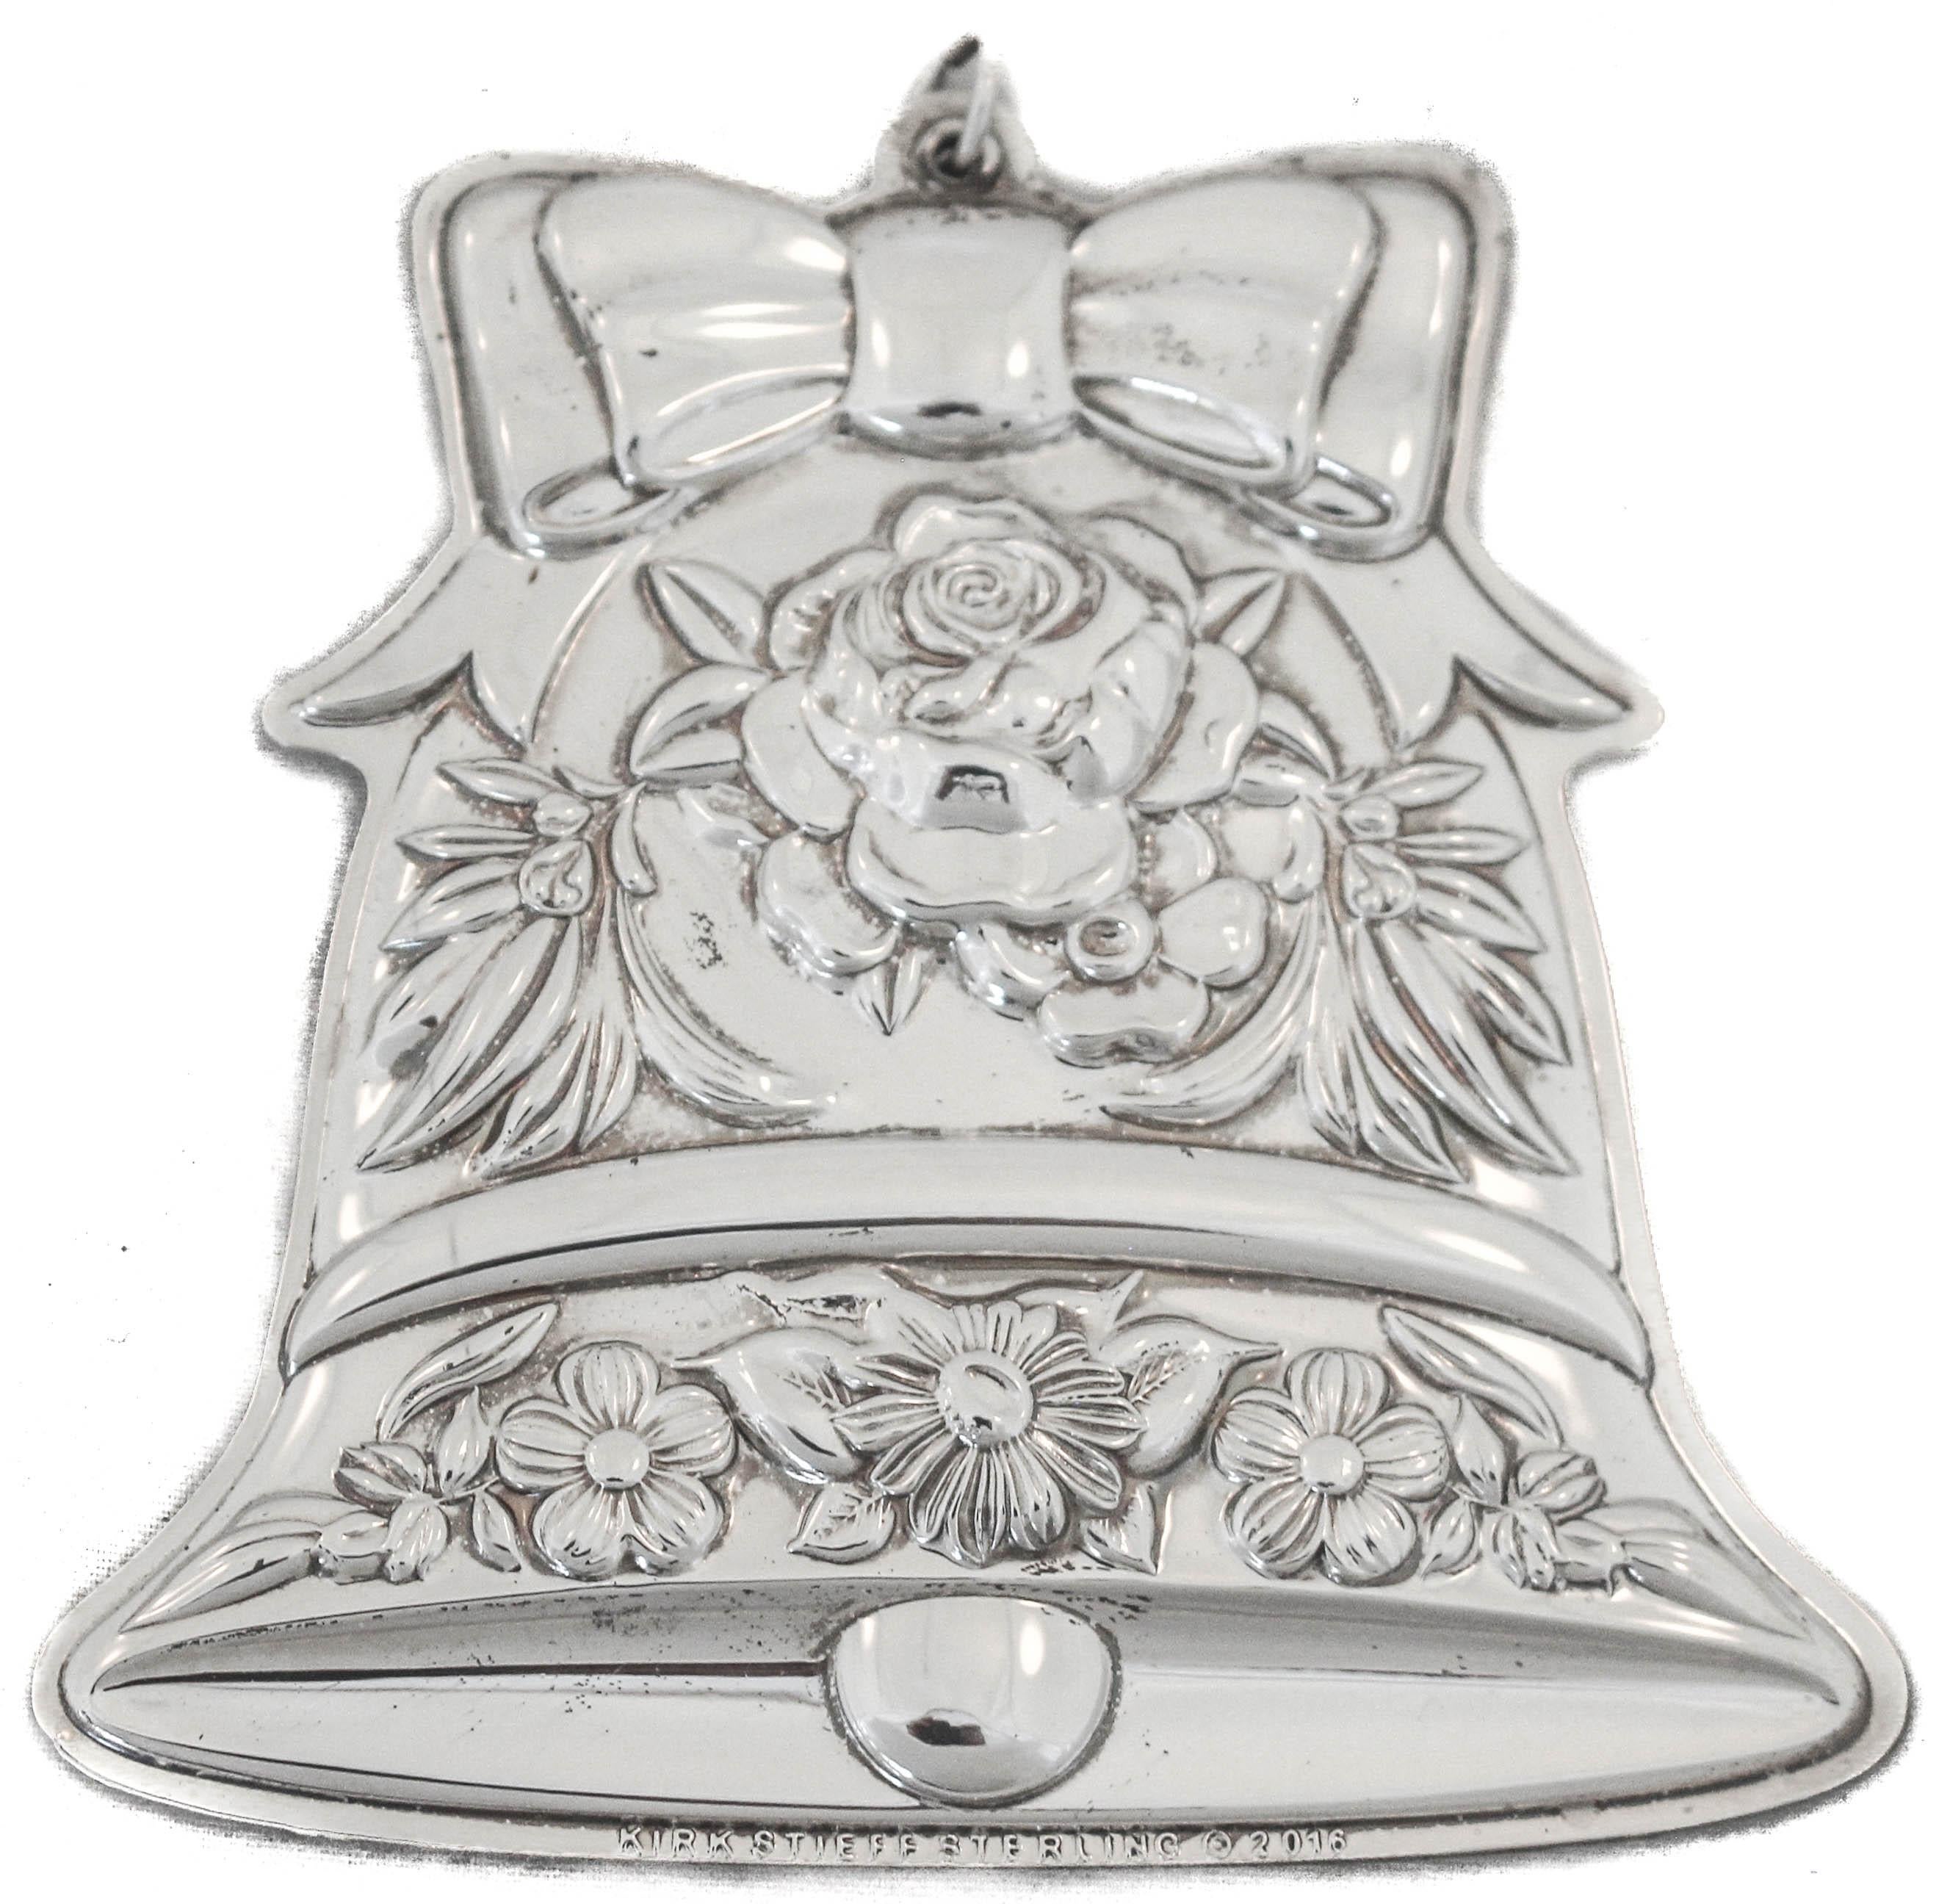 We are delighted to offer you this sterling silver Christmas ornament by the Kirk-Stieff Silver Company of Baltimore, Maryland. The most iconic sound of the holiday season is that of church bells ringing and welcoming in this auspicious time of